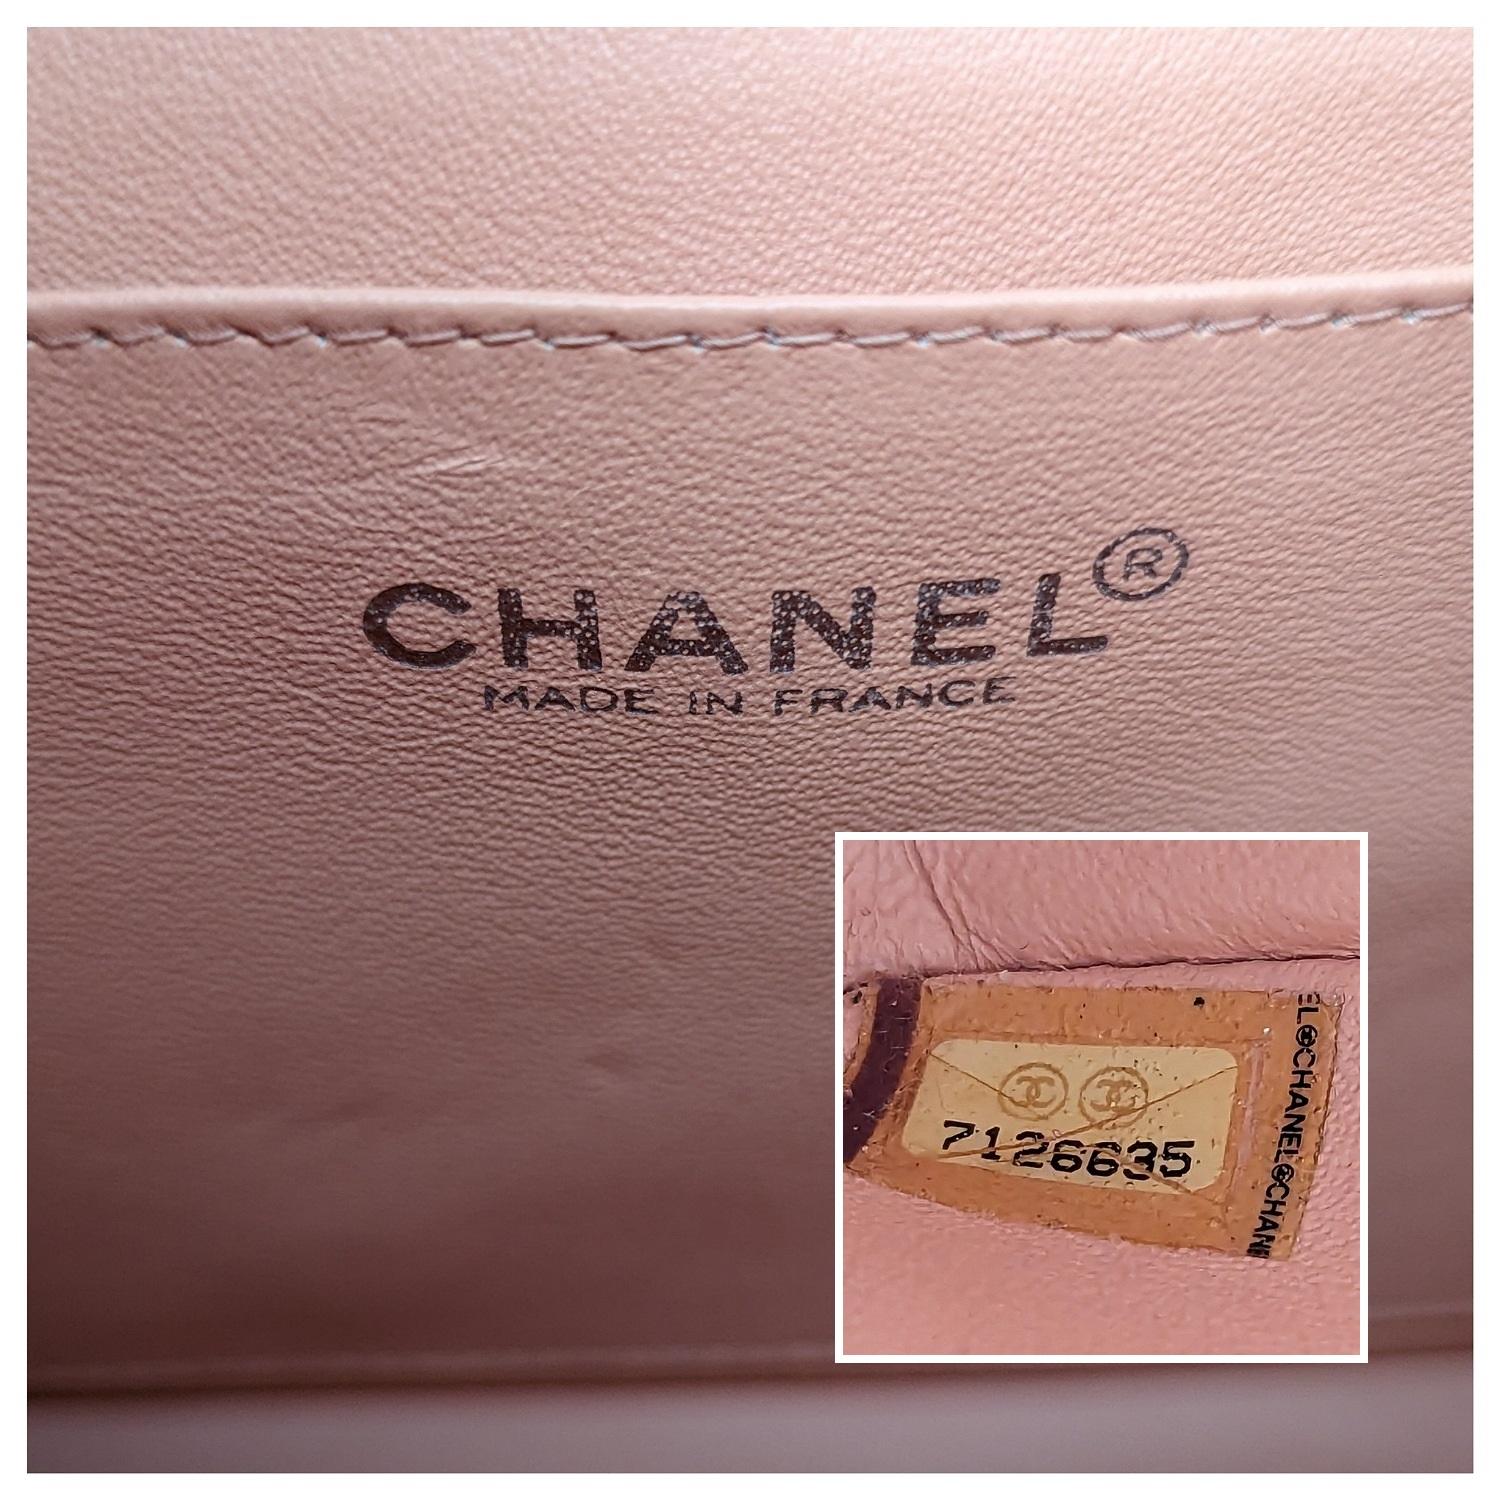 Chanel Vintage Peach Square Quilted Medium Flap Bag For Sale 3